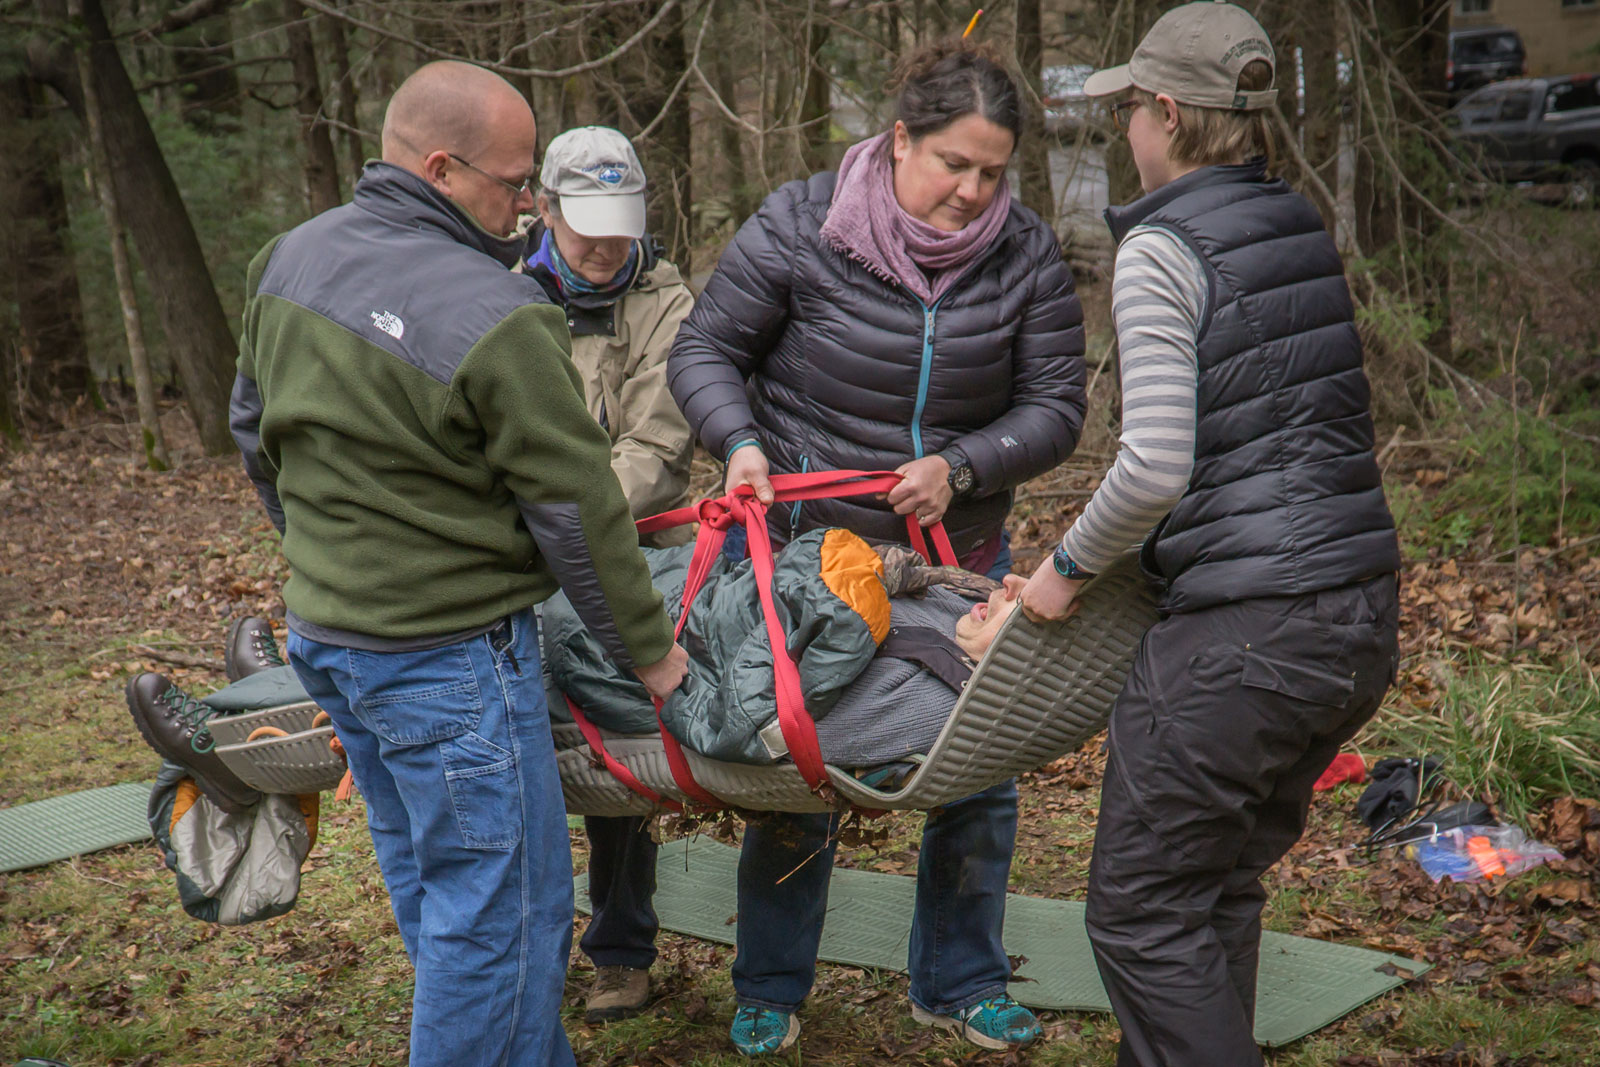 Participants in the Wilderness Emergency Medical Responder course practice carrying an injured person